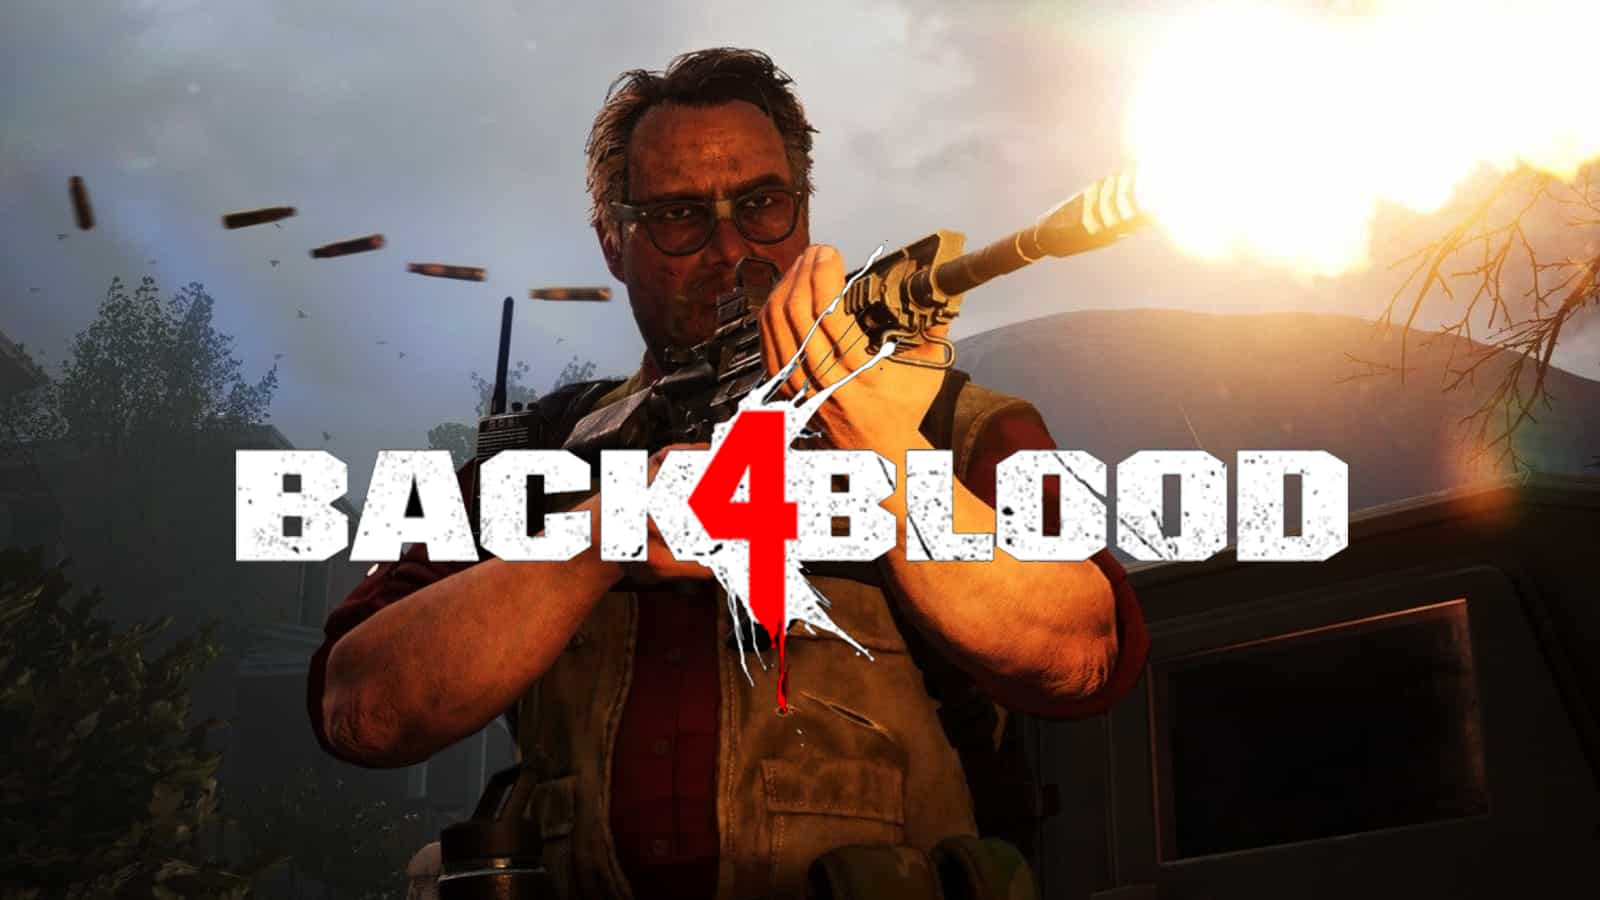 Back for Blood Gameplay and First Impressions 